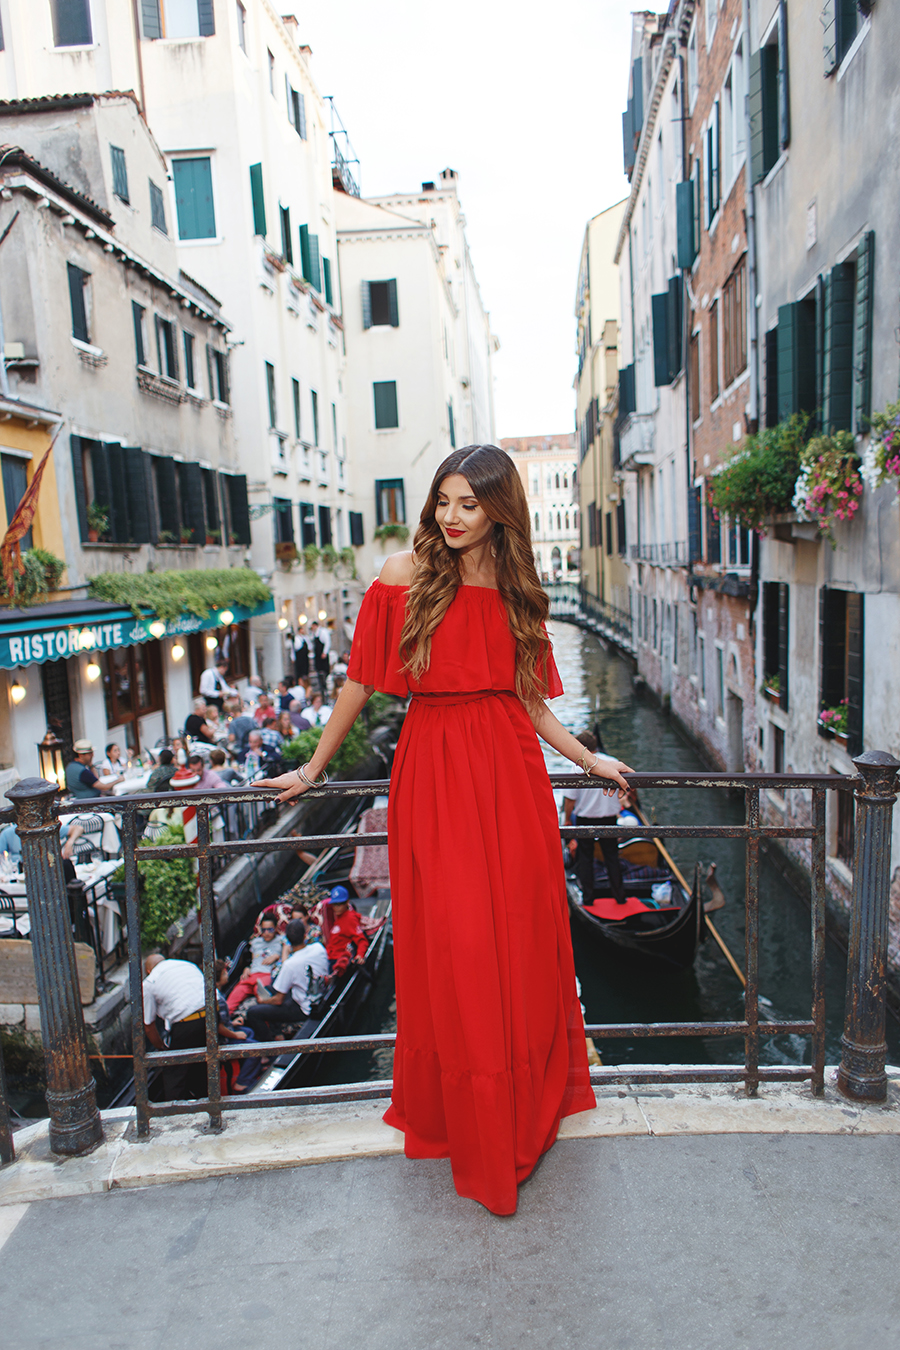 larisa costea, larisa costea blog, the mysterious girl, the mysterious girl blog, fashion blog, blogger, fashion, fashionista, it girl, travel blog, travel, traveler, ootd, lotd, outfit inspiration,look of the day,outfit of the day,what to wear,venice, venezia, san marco,piazza san marco,san marco square,fashion blogger in venice, travelbloggerin venice,larisainvenice, larisainvenezia,larisainitaly,red dress,long red dress, gown,chic diva,chic diva dress,rochie lunga, rochie ocazie, redl lips,red lipstick,bellami hair extension,bellami bella, pigeons, briges, ponte, gondola